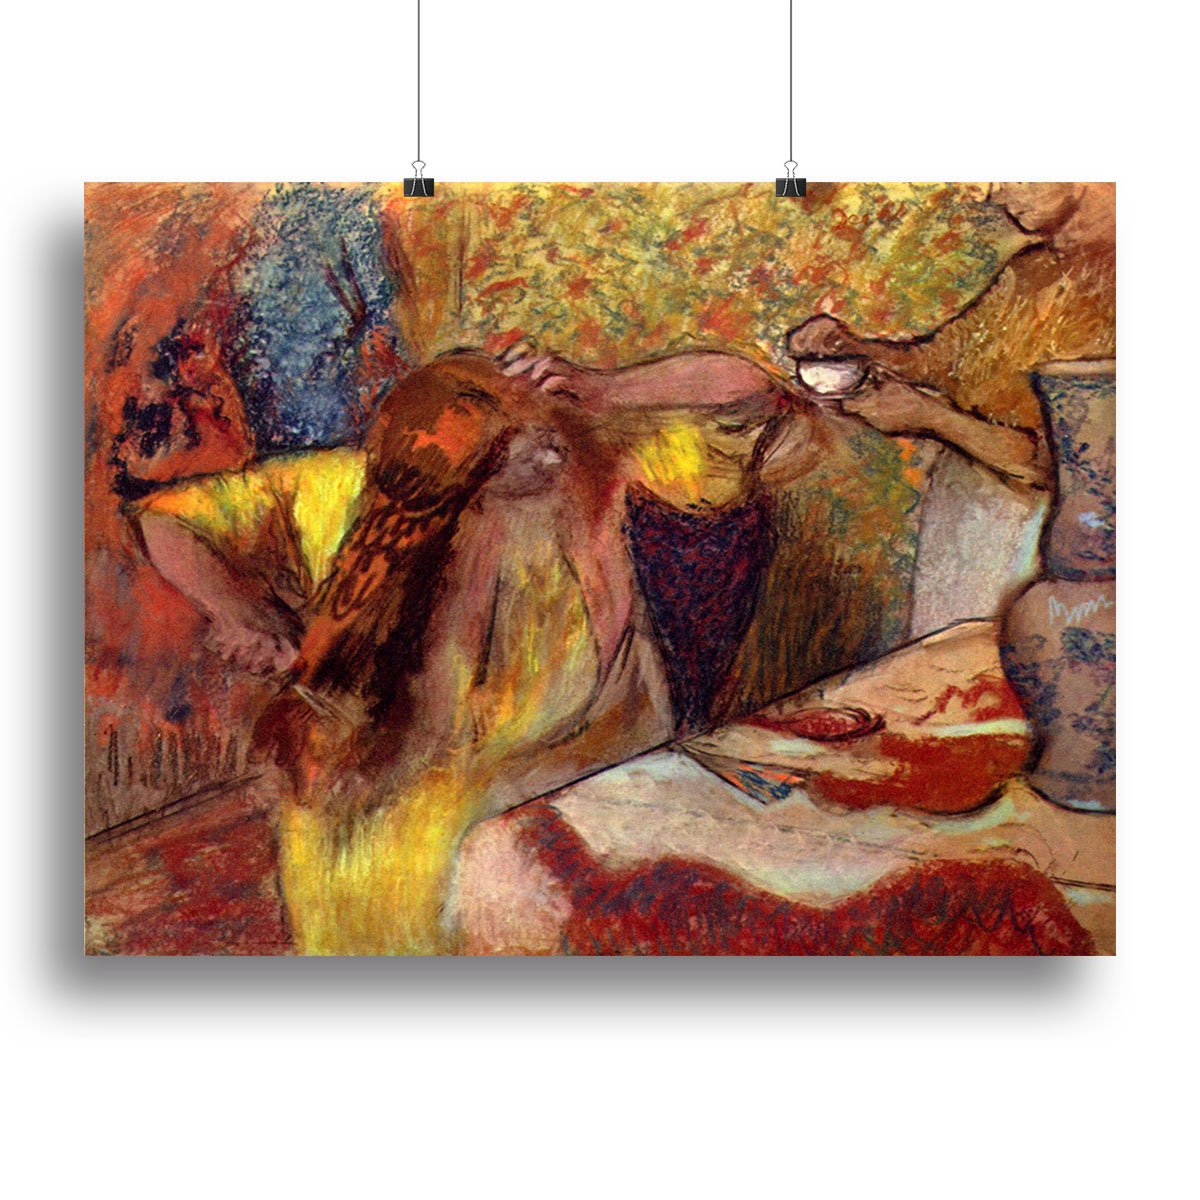 Women at the toilet 1 by Degas Canvas Print or Poster